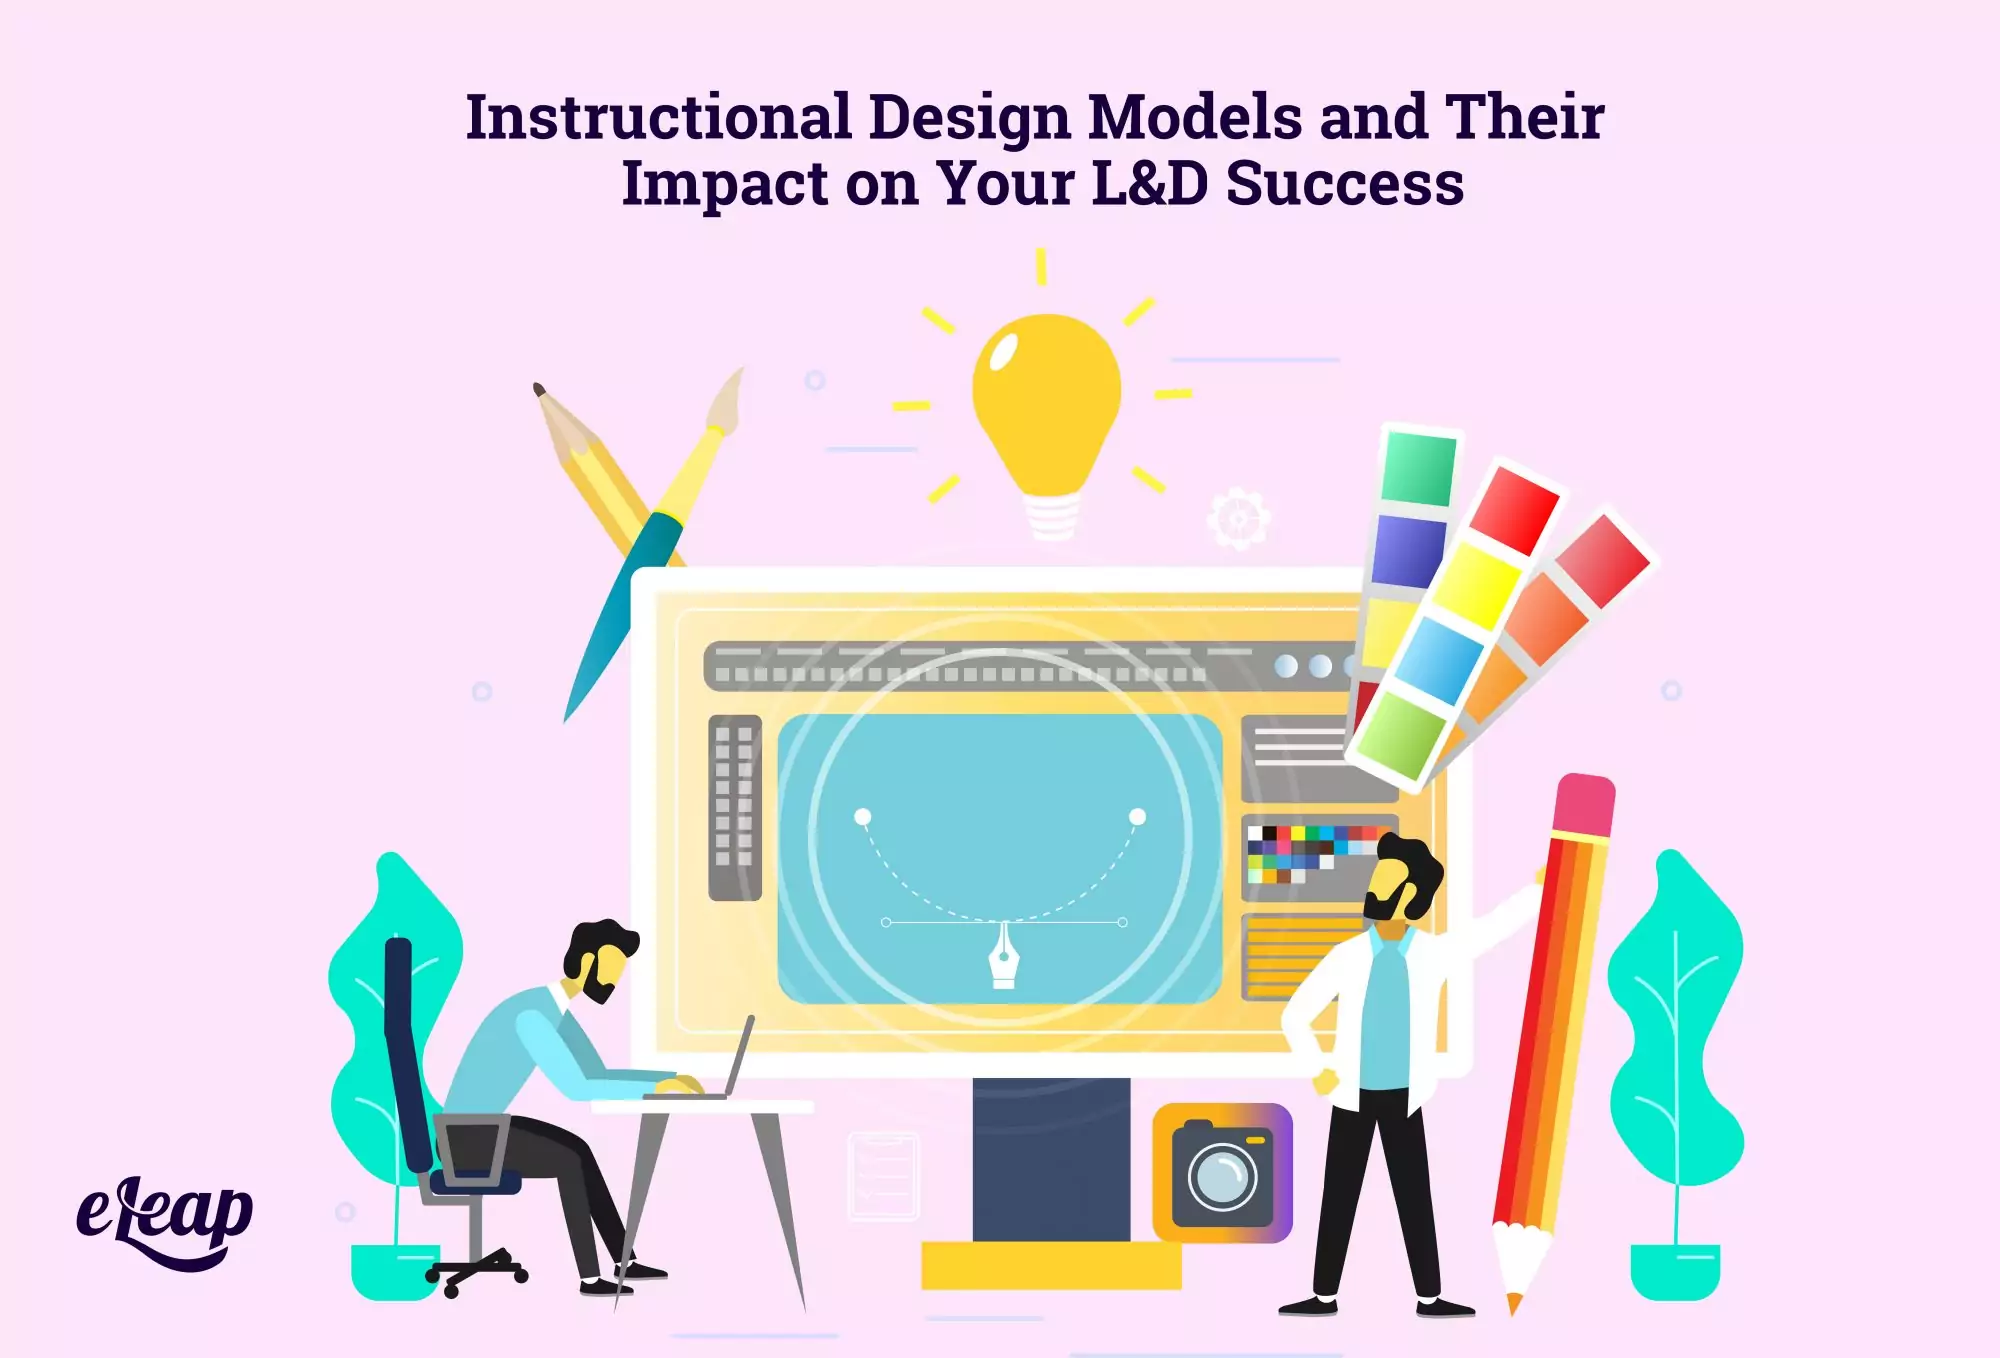 Instructional Design Models and Their Impact on Your L&D Success